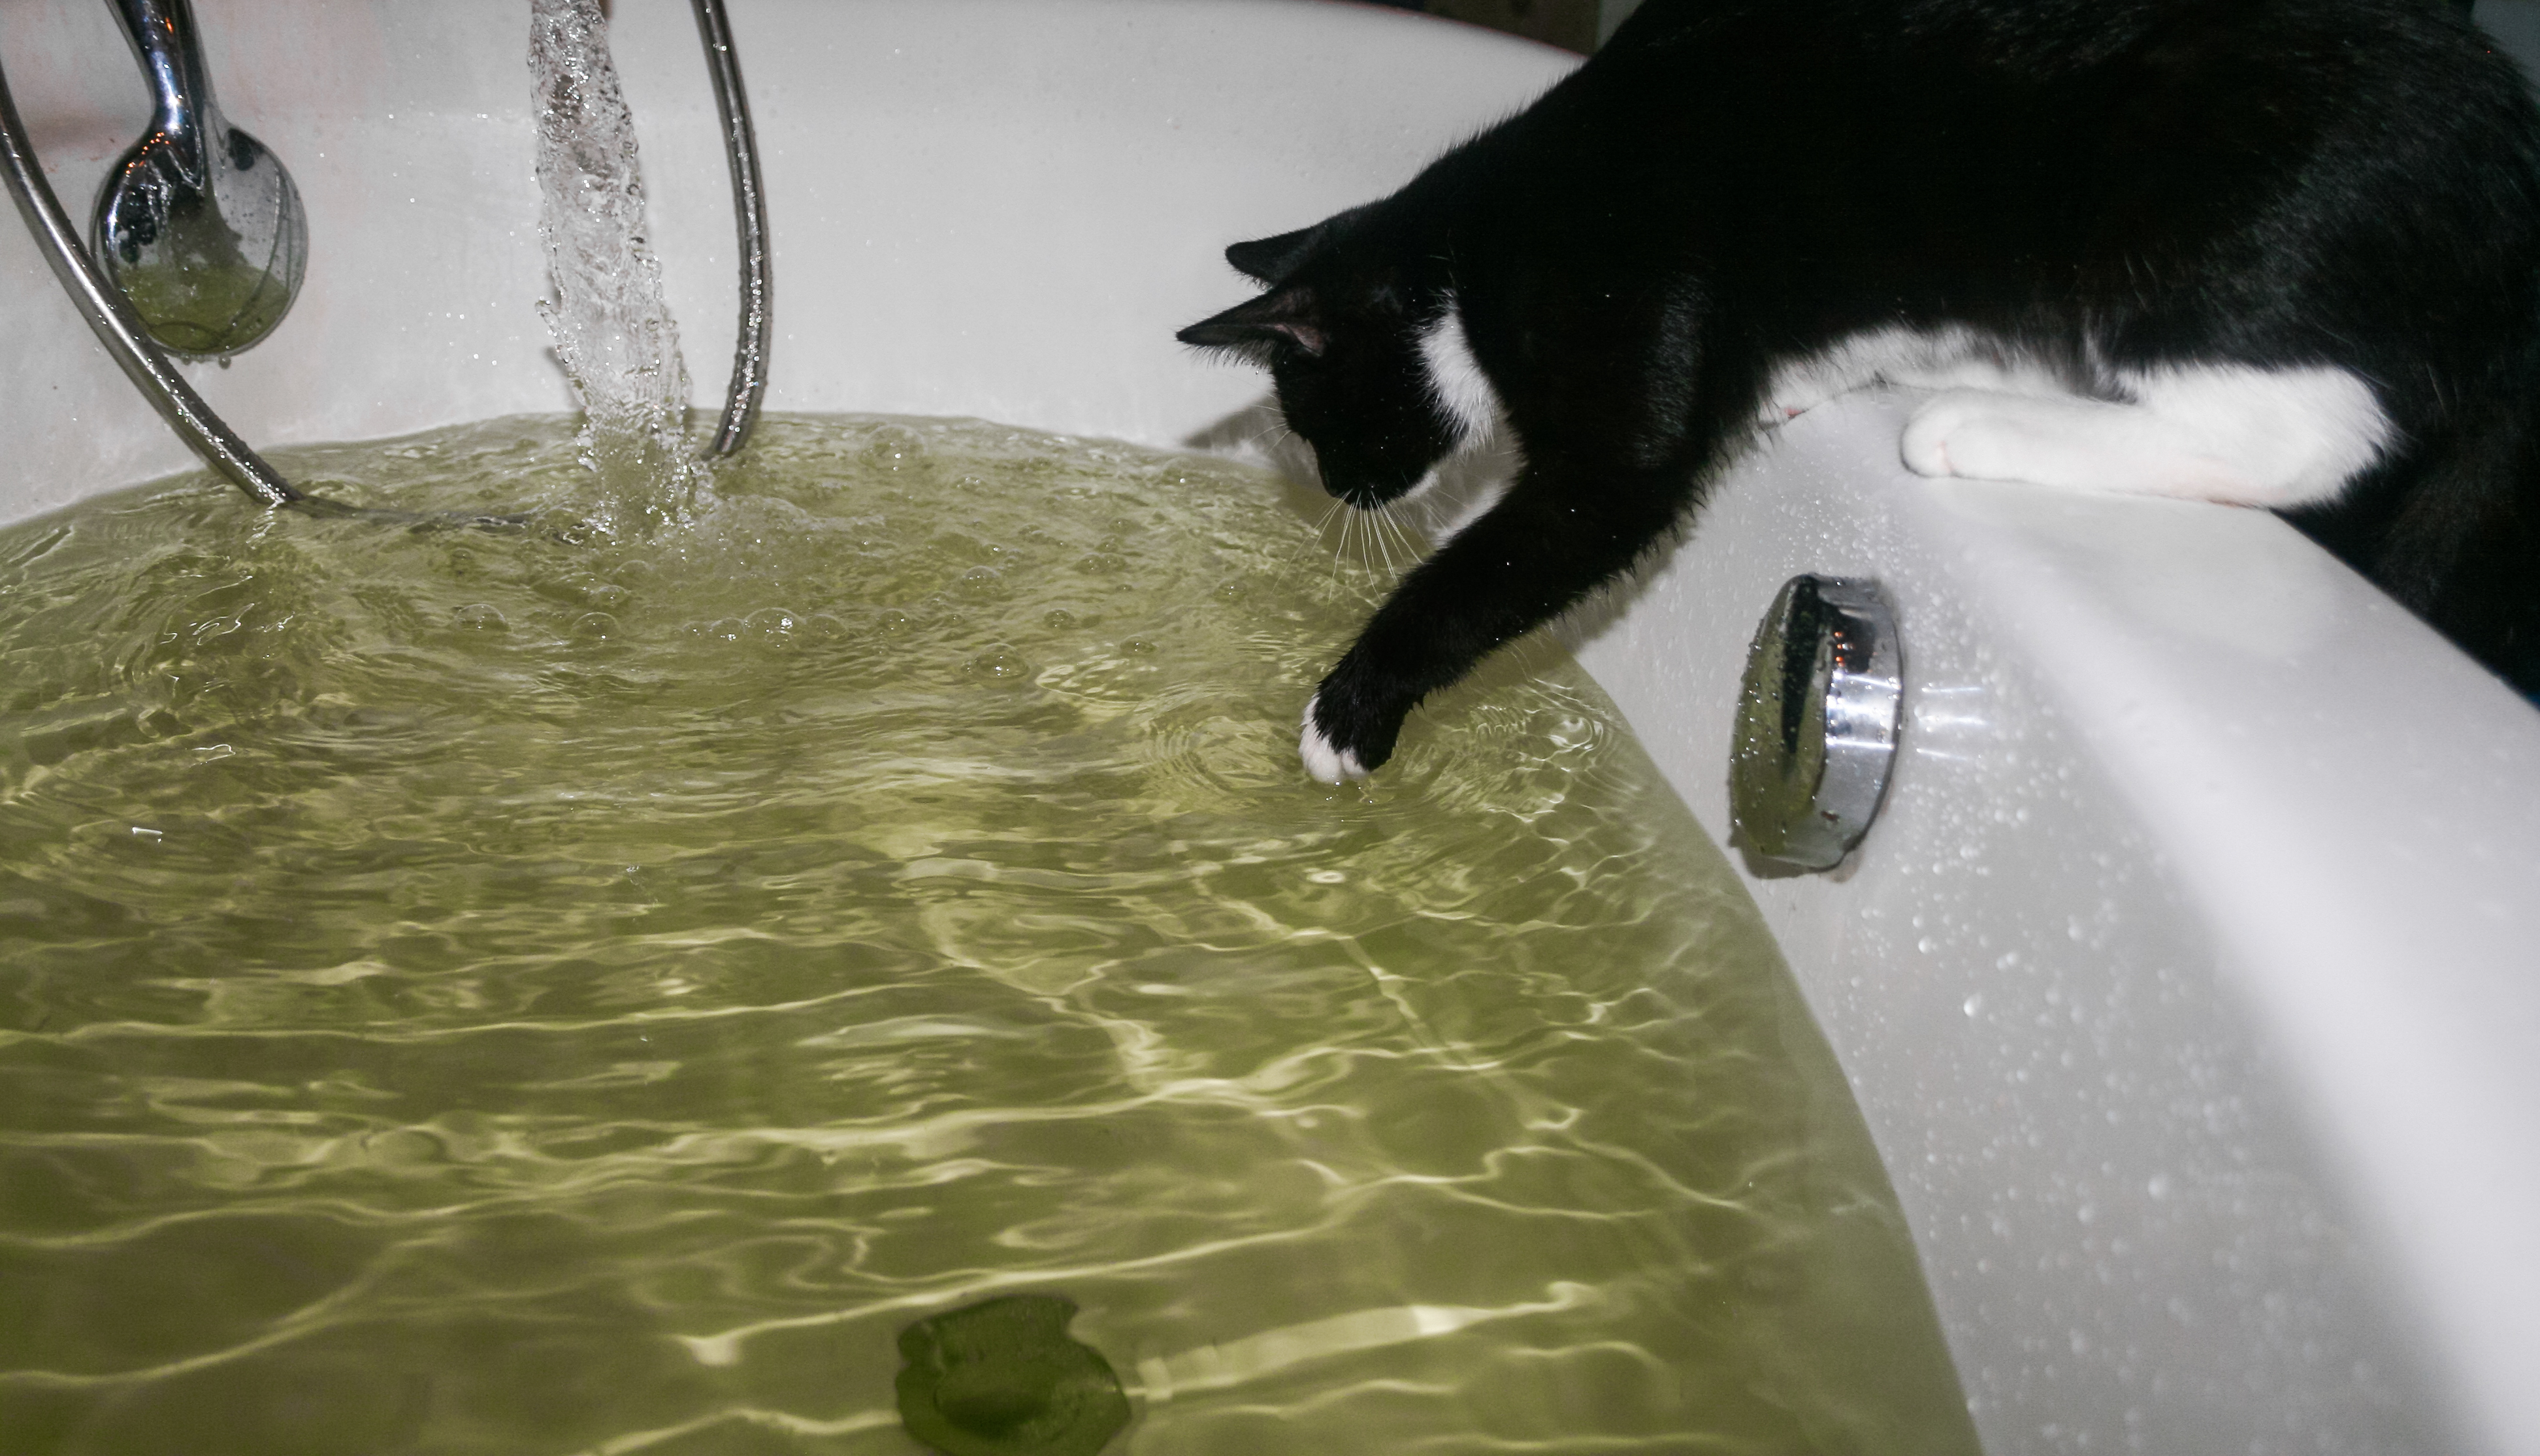 Woman shares what happens when cat loves baths as much as she does